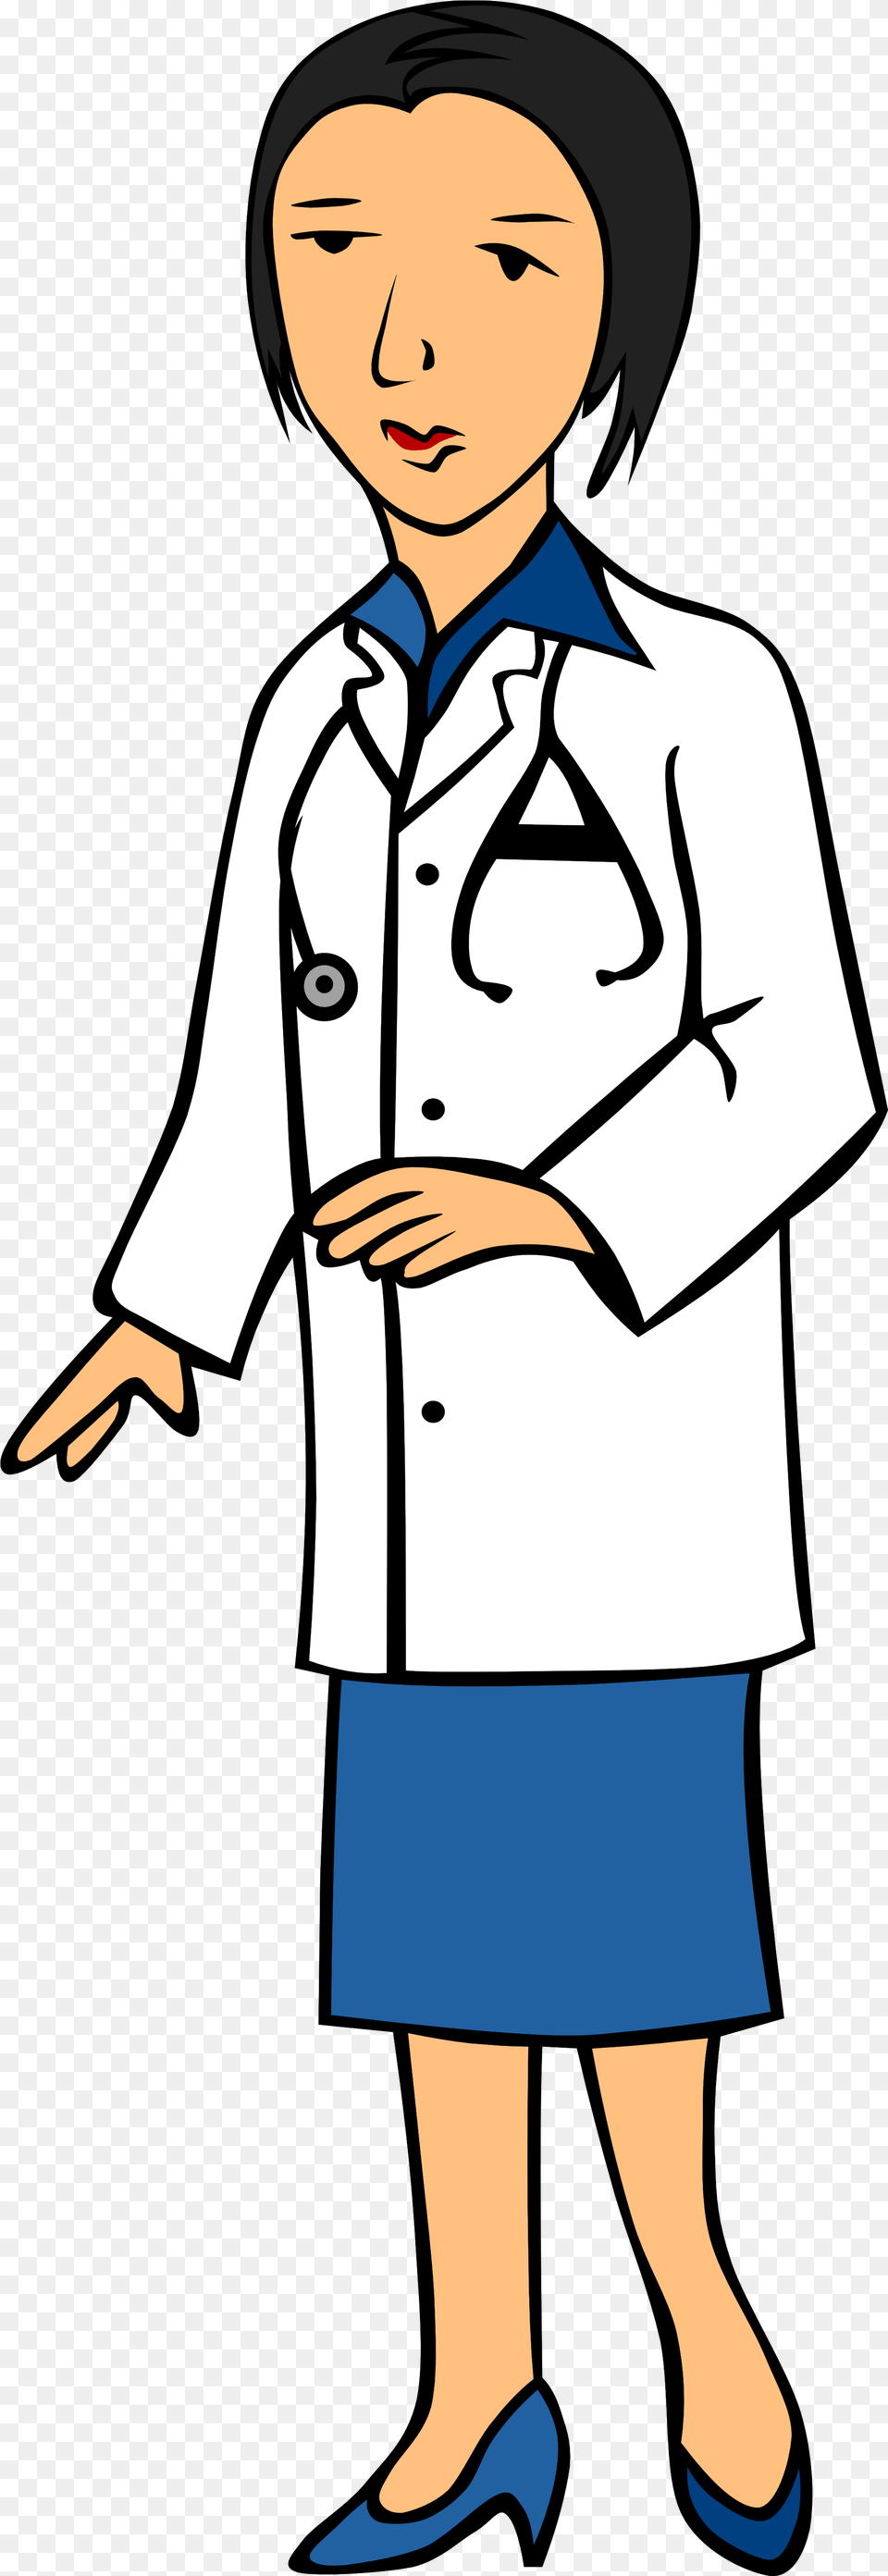 Free Transparent Doctor Cliparts People Who Help Us Doctor, Clothing, Coat, Lab Coat, Boy Png Image